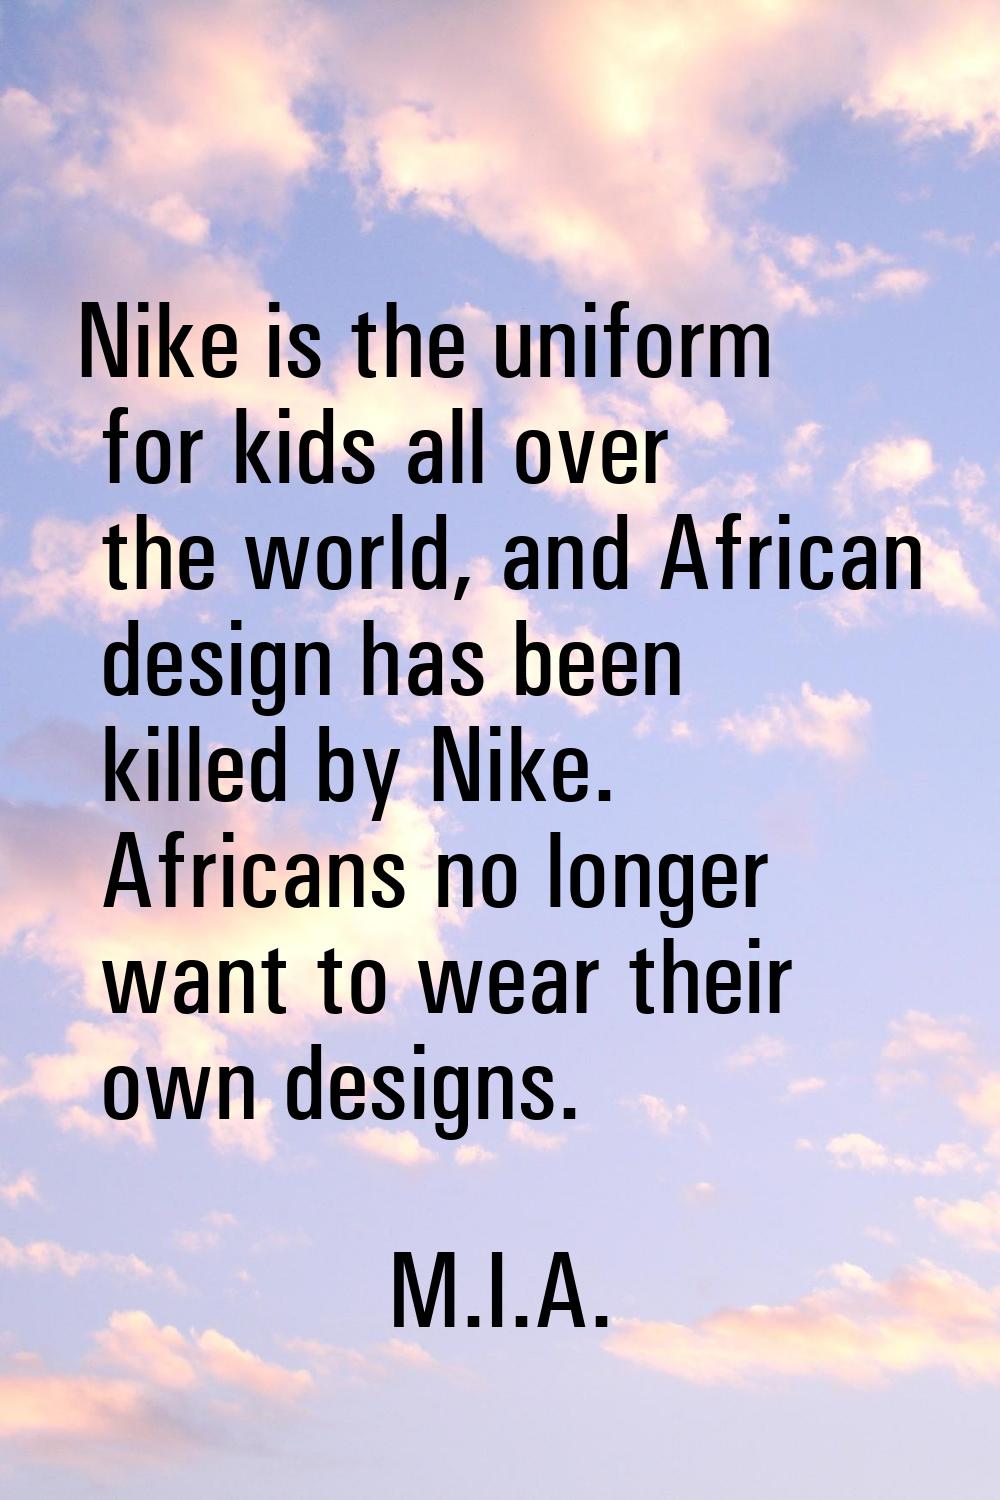 Nike is the uniform for kids all over the world, and African design has been killed by Nike. Africa